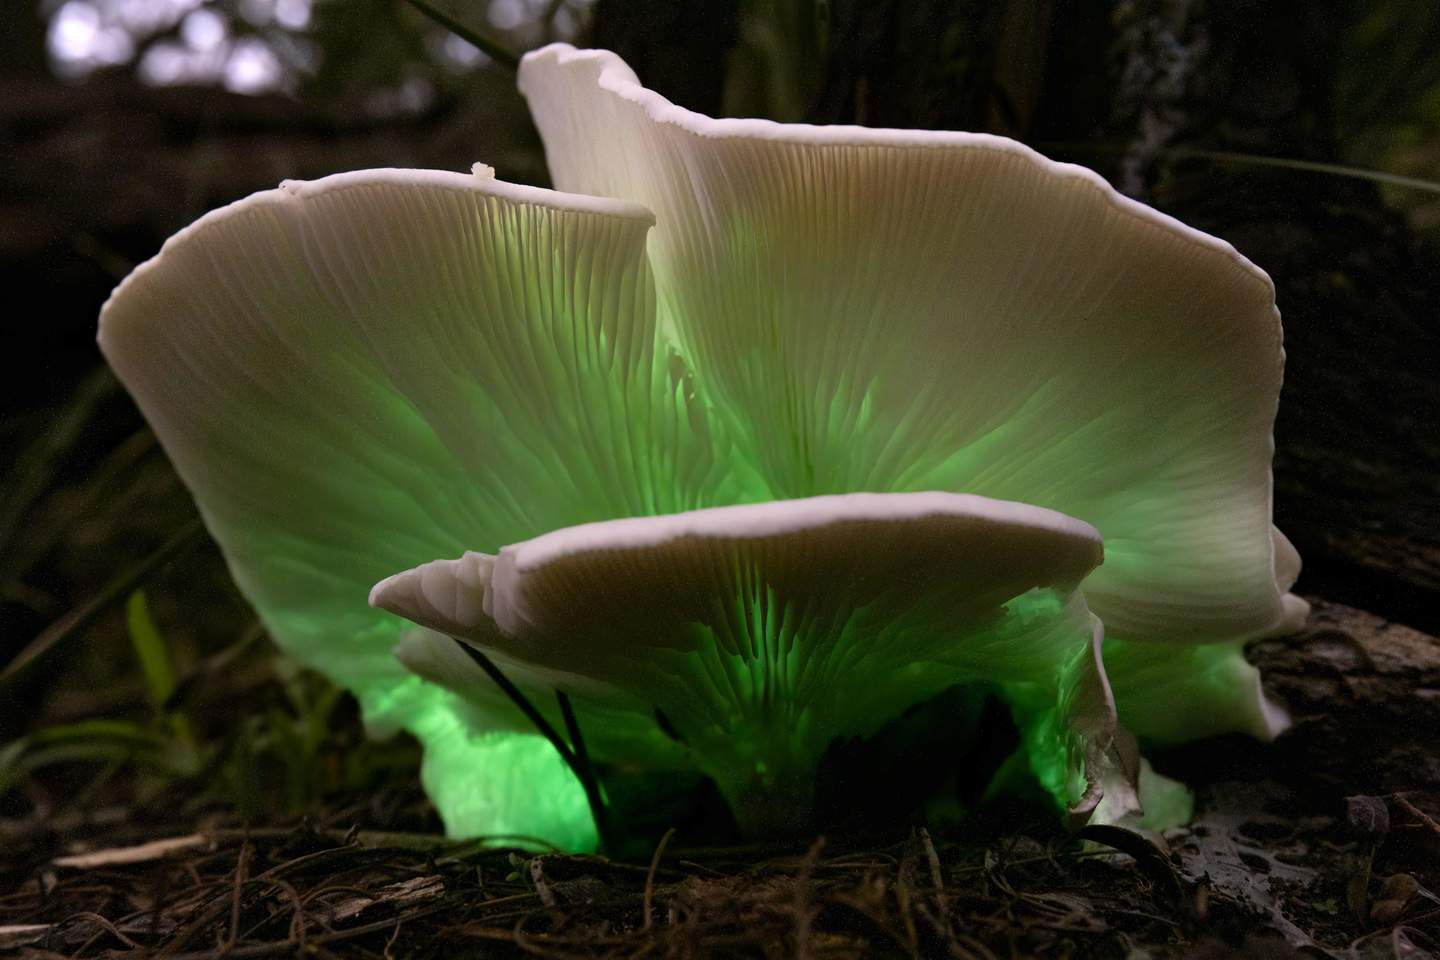 An larger fungi illuminated with a soft green glow in the evening. 